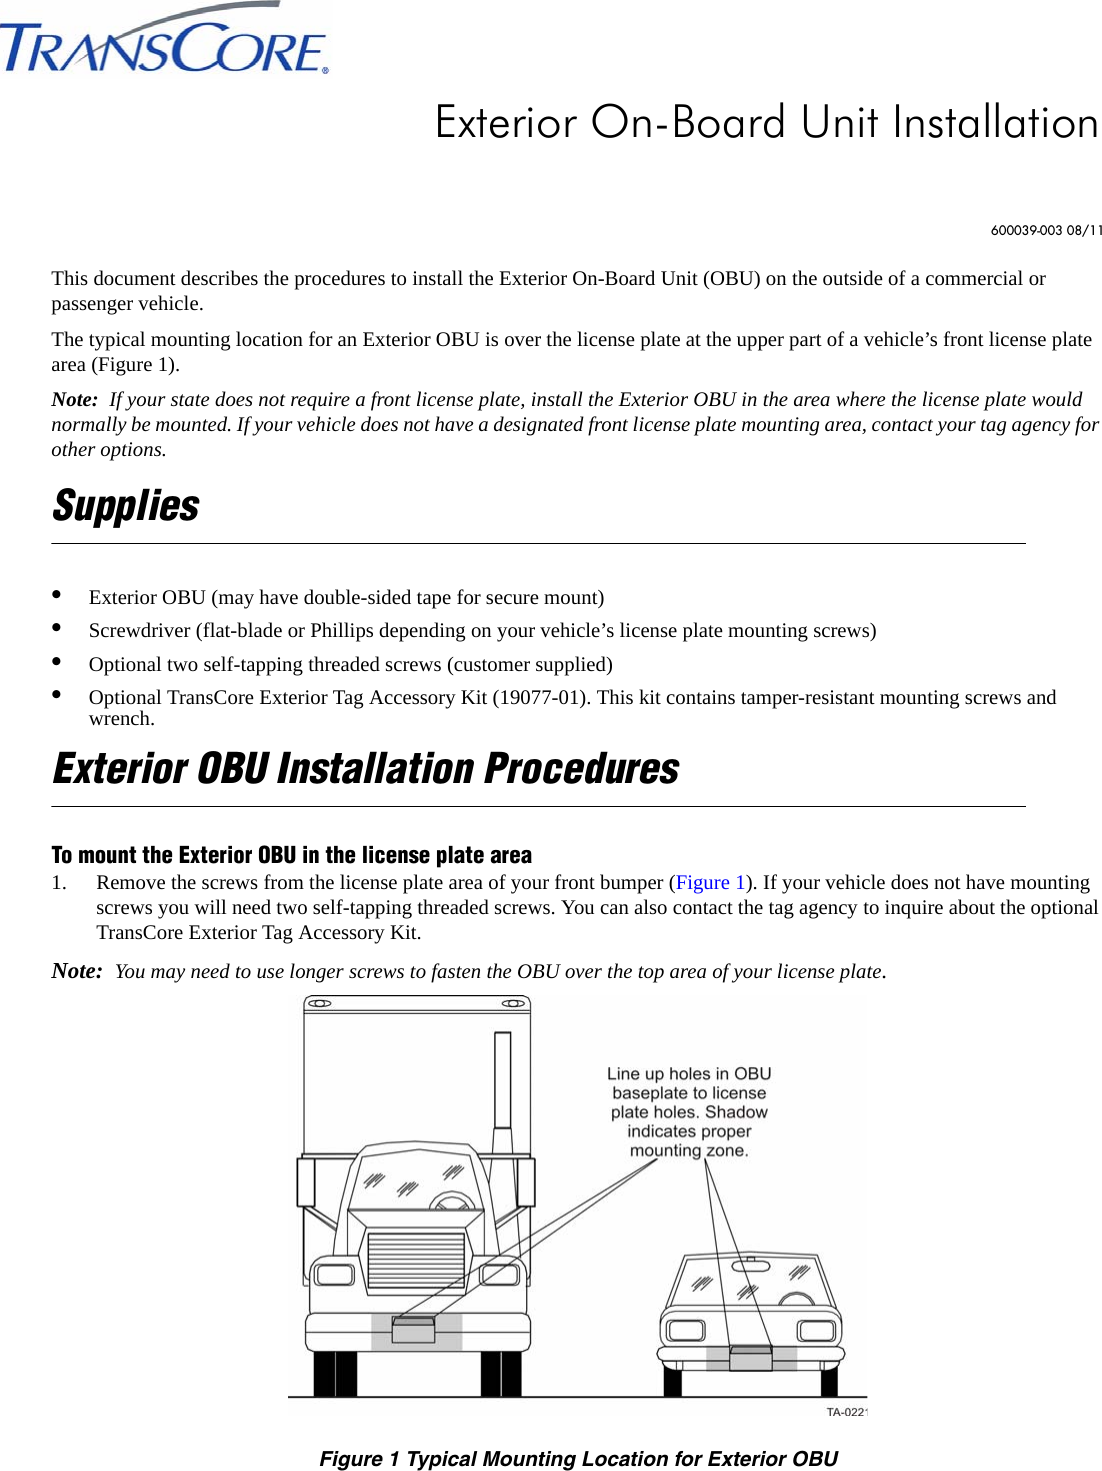 This document describes the procedures to install the Exterior On-Board Unit (OBU) on the outside of a commercial or passenger vehicle.The typical mounting location for an Exterior OBU is over the license plate at the upper part of a vehicle’s front license plate area (Figure 1).Note:  If your state does not require a front license plate, install the Exterior OBU in the area where the license plate would normally be mounted. If your vehicle does not have a designated front license plate mounting area, contact your tag agency for other options.Supplies•Exterior OBU (may have double-sided tape for secure mount)•Screwdriver (flat-blade or Phillips depending on your vehicle’s license plate mounting screws)•Optional two self-tapping threaded screws (customer supplied)•Optional TransCore Exterior Tag Accessory Kit (19077-01). This kit contains tamper-resistant mounting screws and wrench.Exterior OBU Installation ProceduresTo mount the Exterior OBU in the license plate area1. Remove the screws from the license plate area of your front bumper (Figure 1). If your vehicle does not have mounting screws you will need two self-tapping threaded screws. You can also contact the tag agency to inquire about the optional TransCore Exterior Tag Accessory Kit. Note:  You may need to use longer screws to fasten the OBU over the top area of your license plate.Figure 1 Typical Mounting Location for Exterior OBUExterior On-Board Unit Installation600039-003 08/11